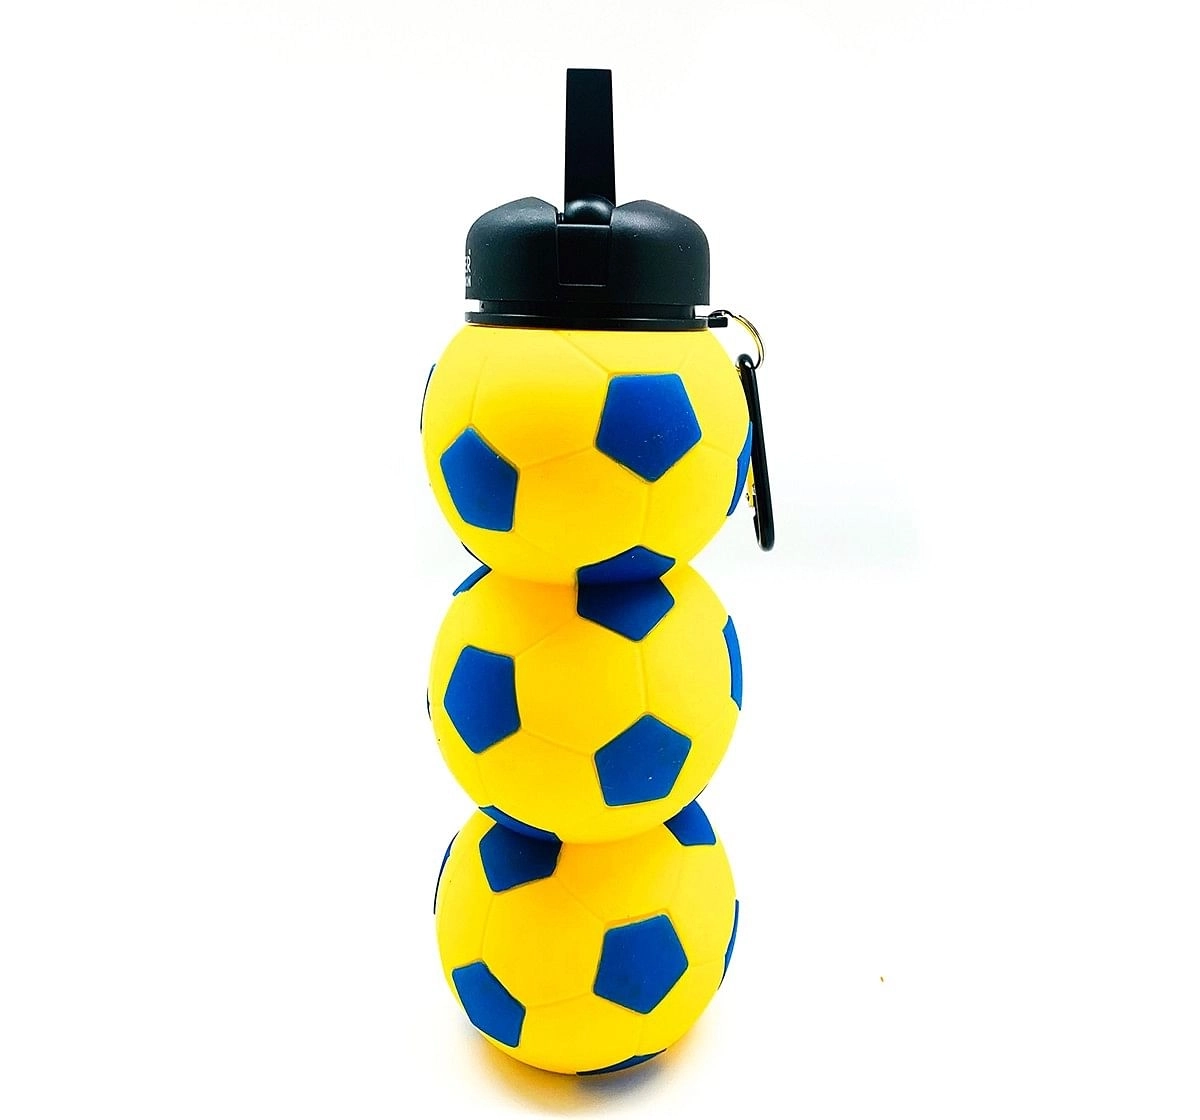 Hamster London Football Bottle for Kids age 3Y+, Yellow 